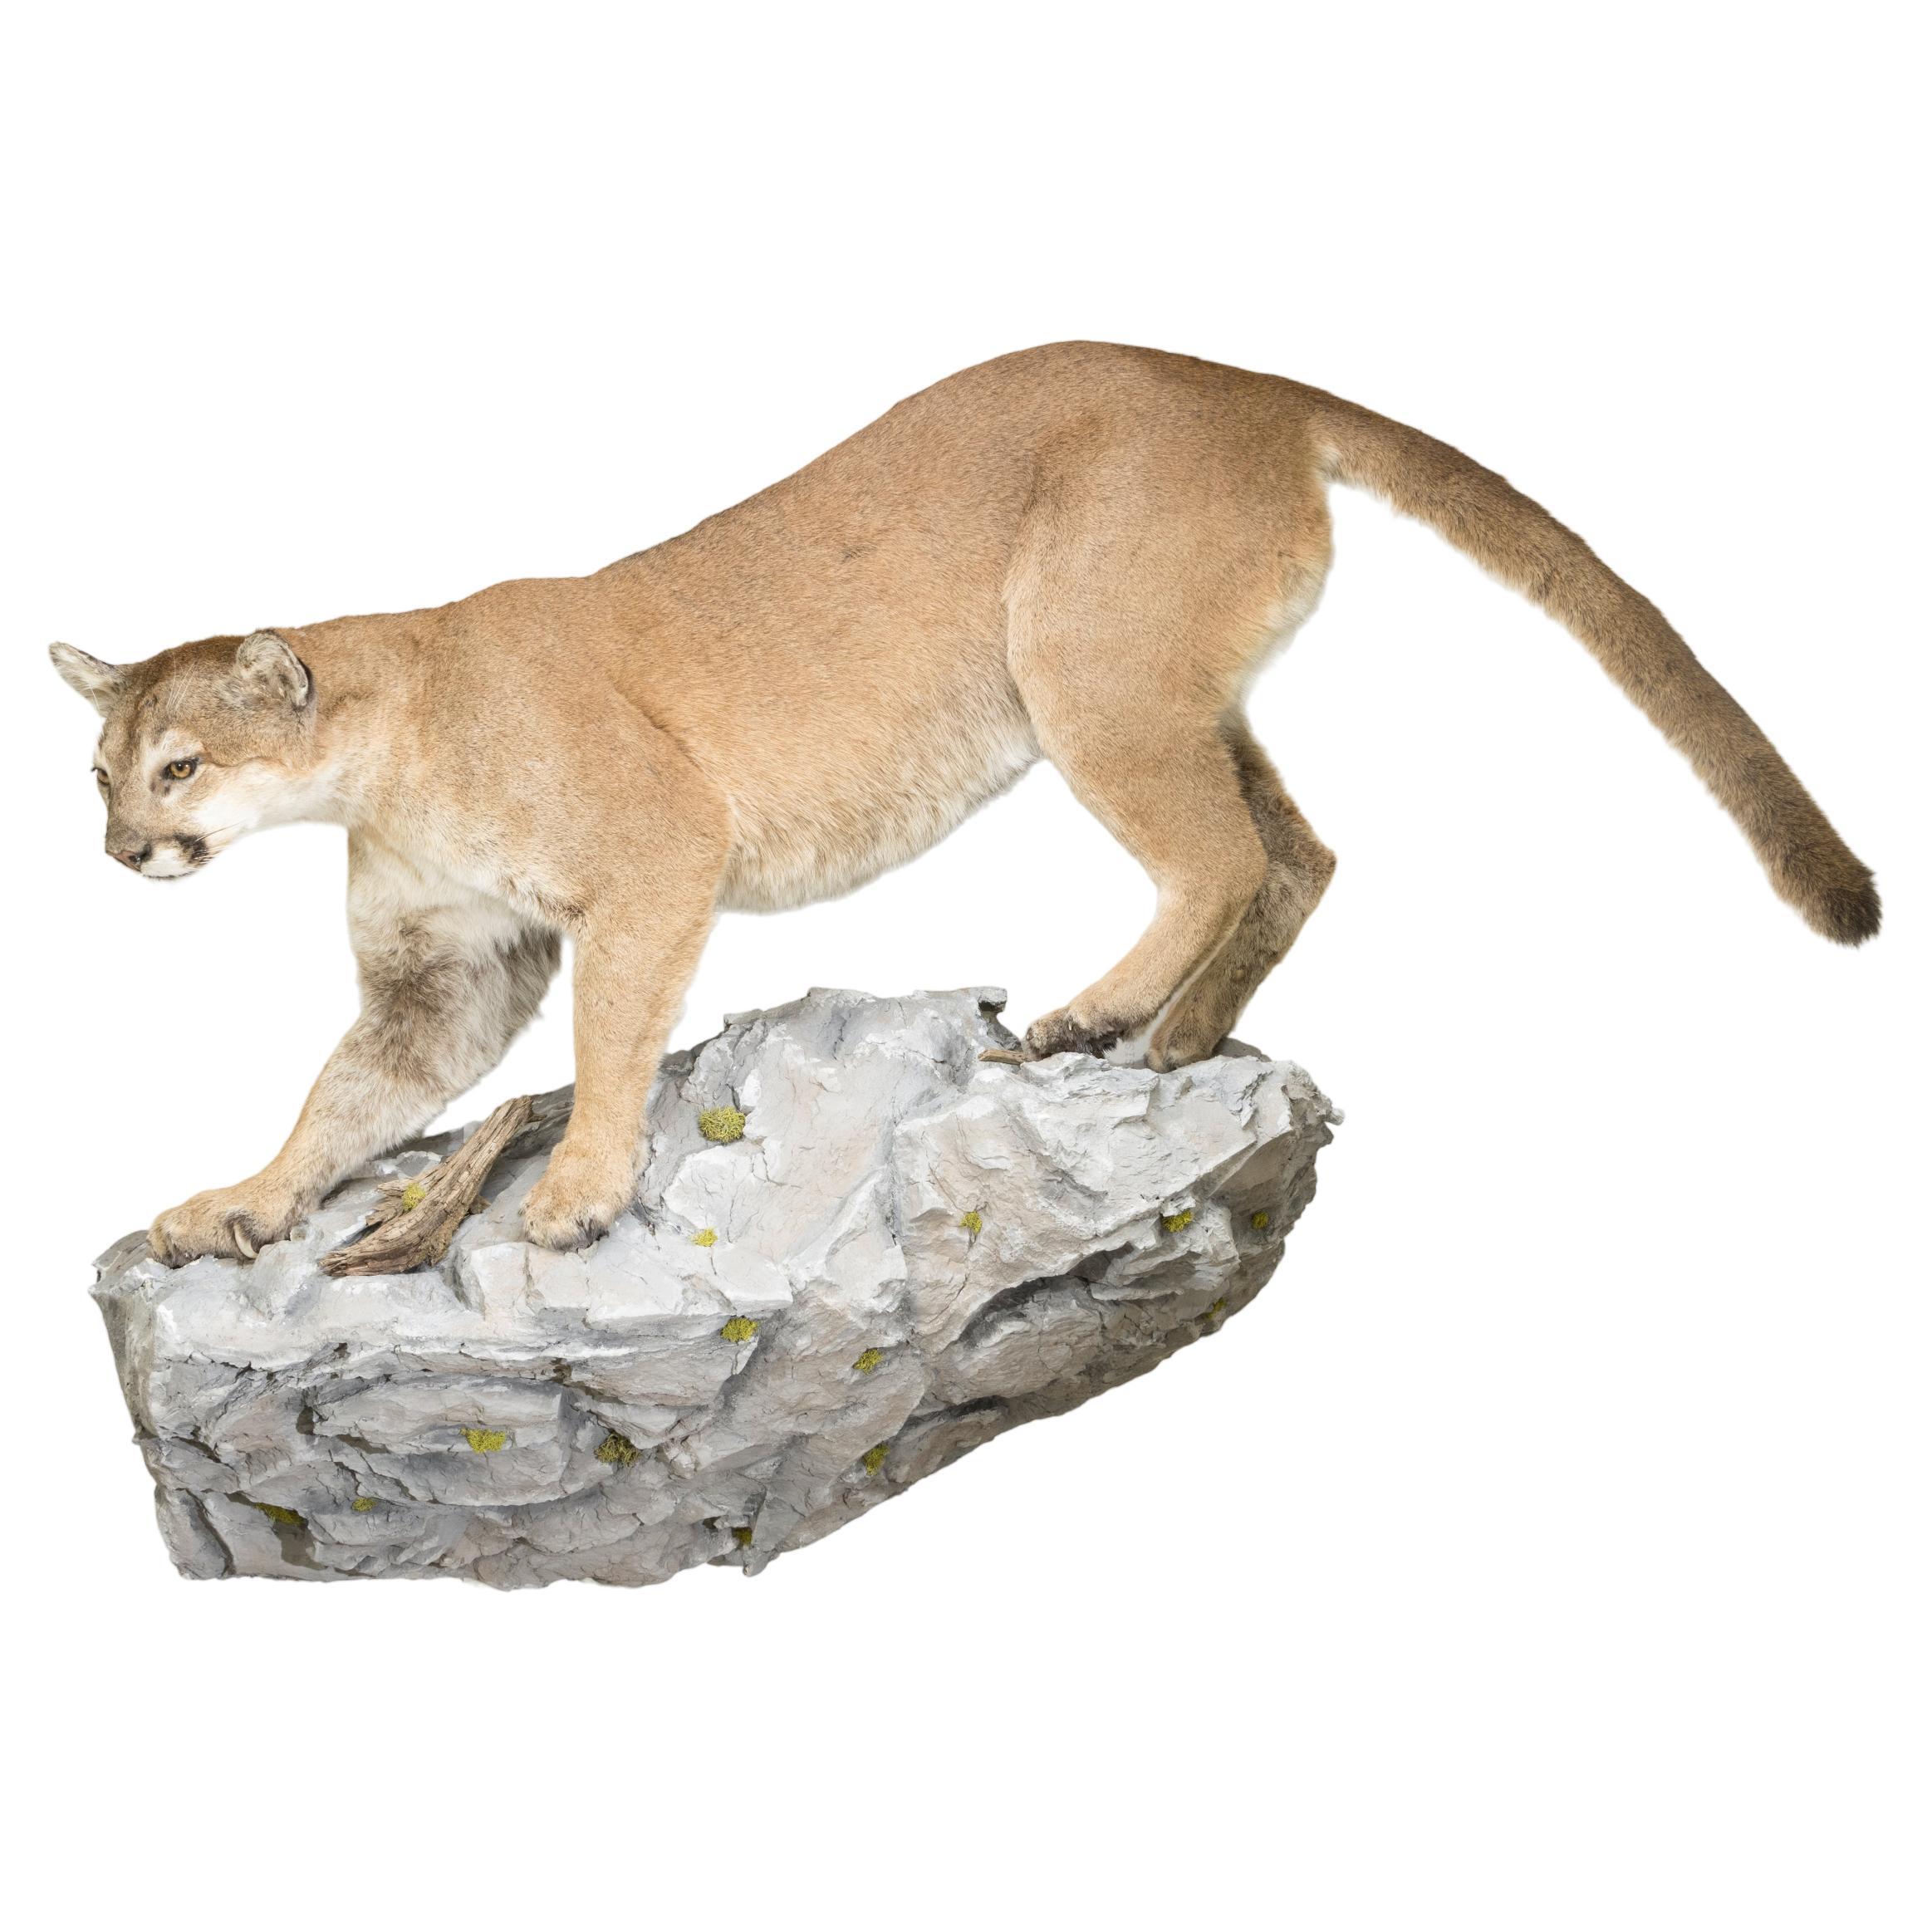 Huge Idaho Cougar Taxidermy Mount on Base For Sale